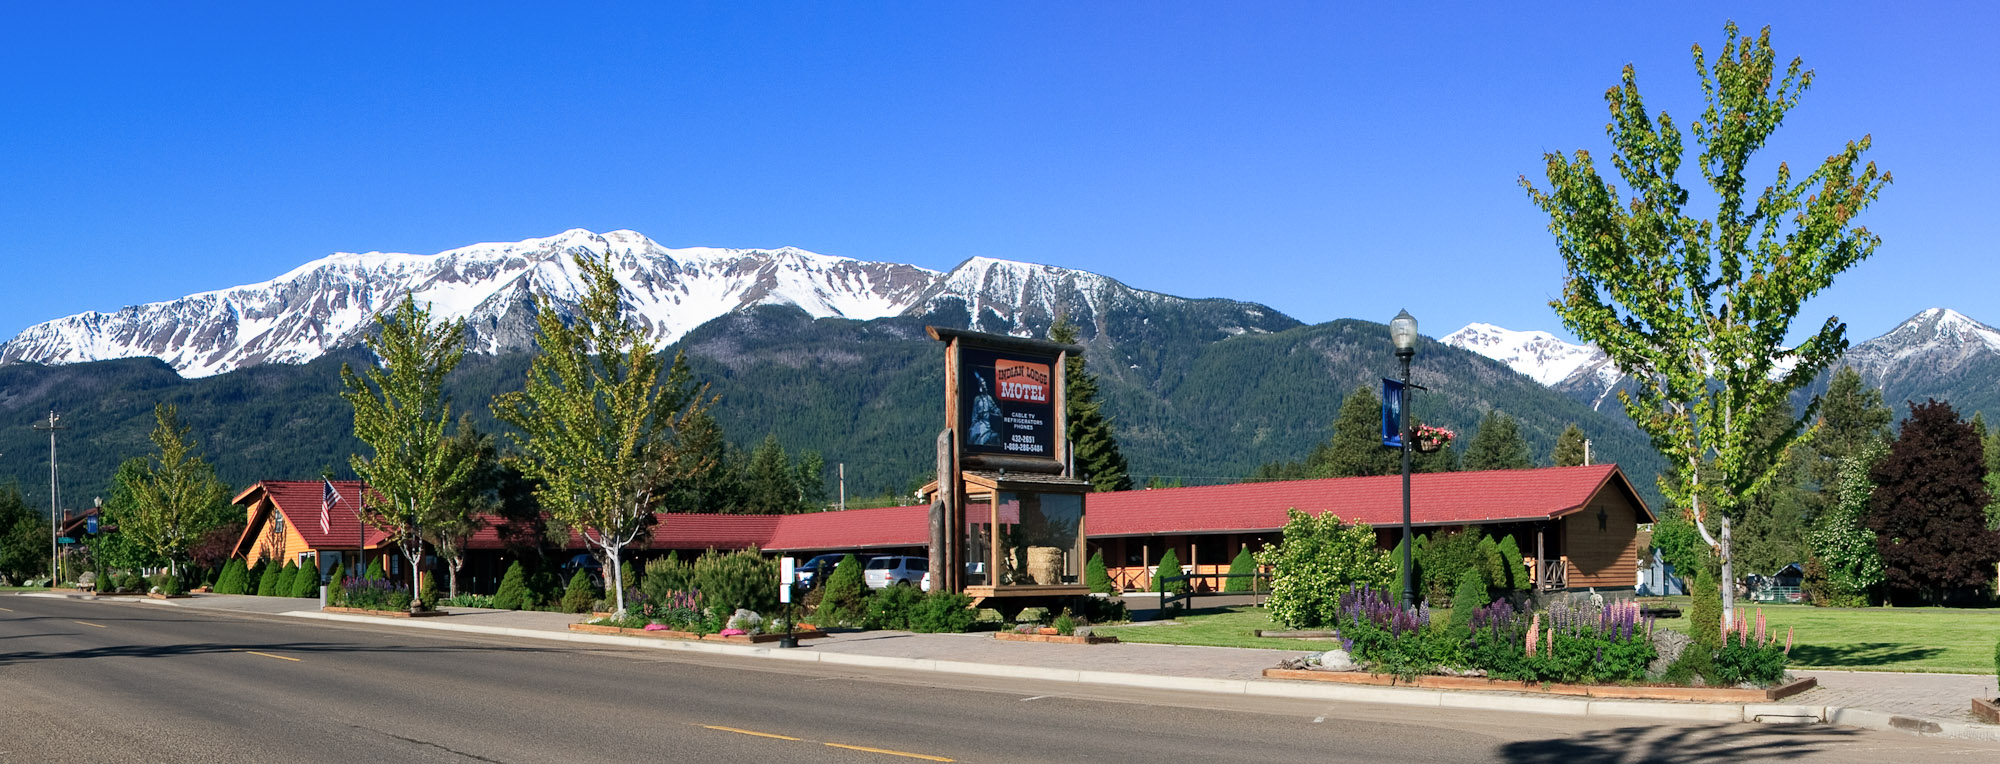 exterior of motel with mountains in the background